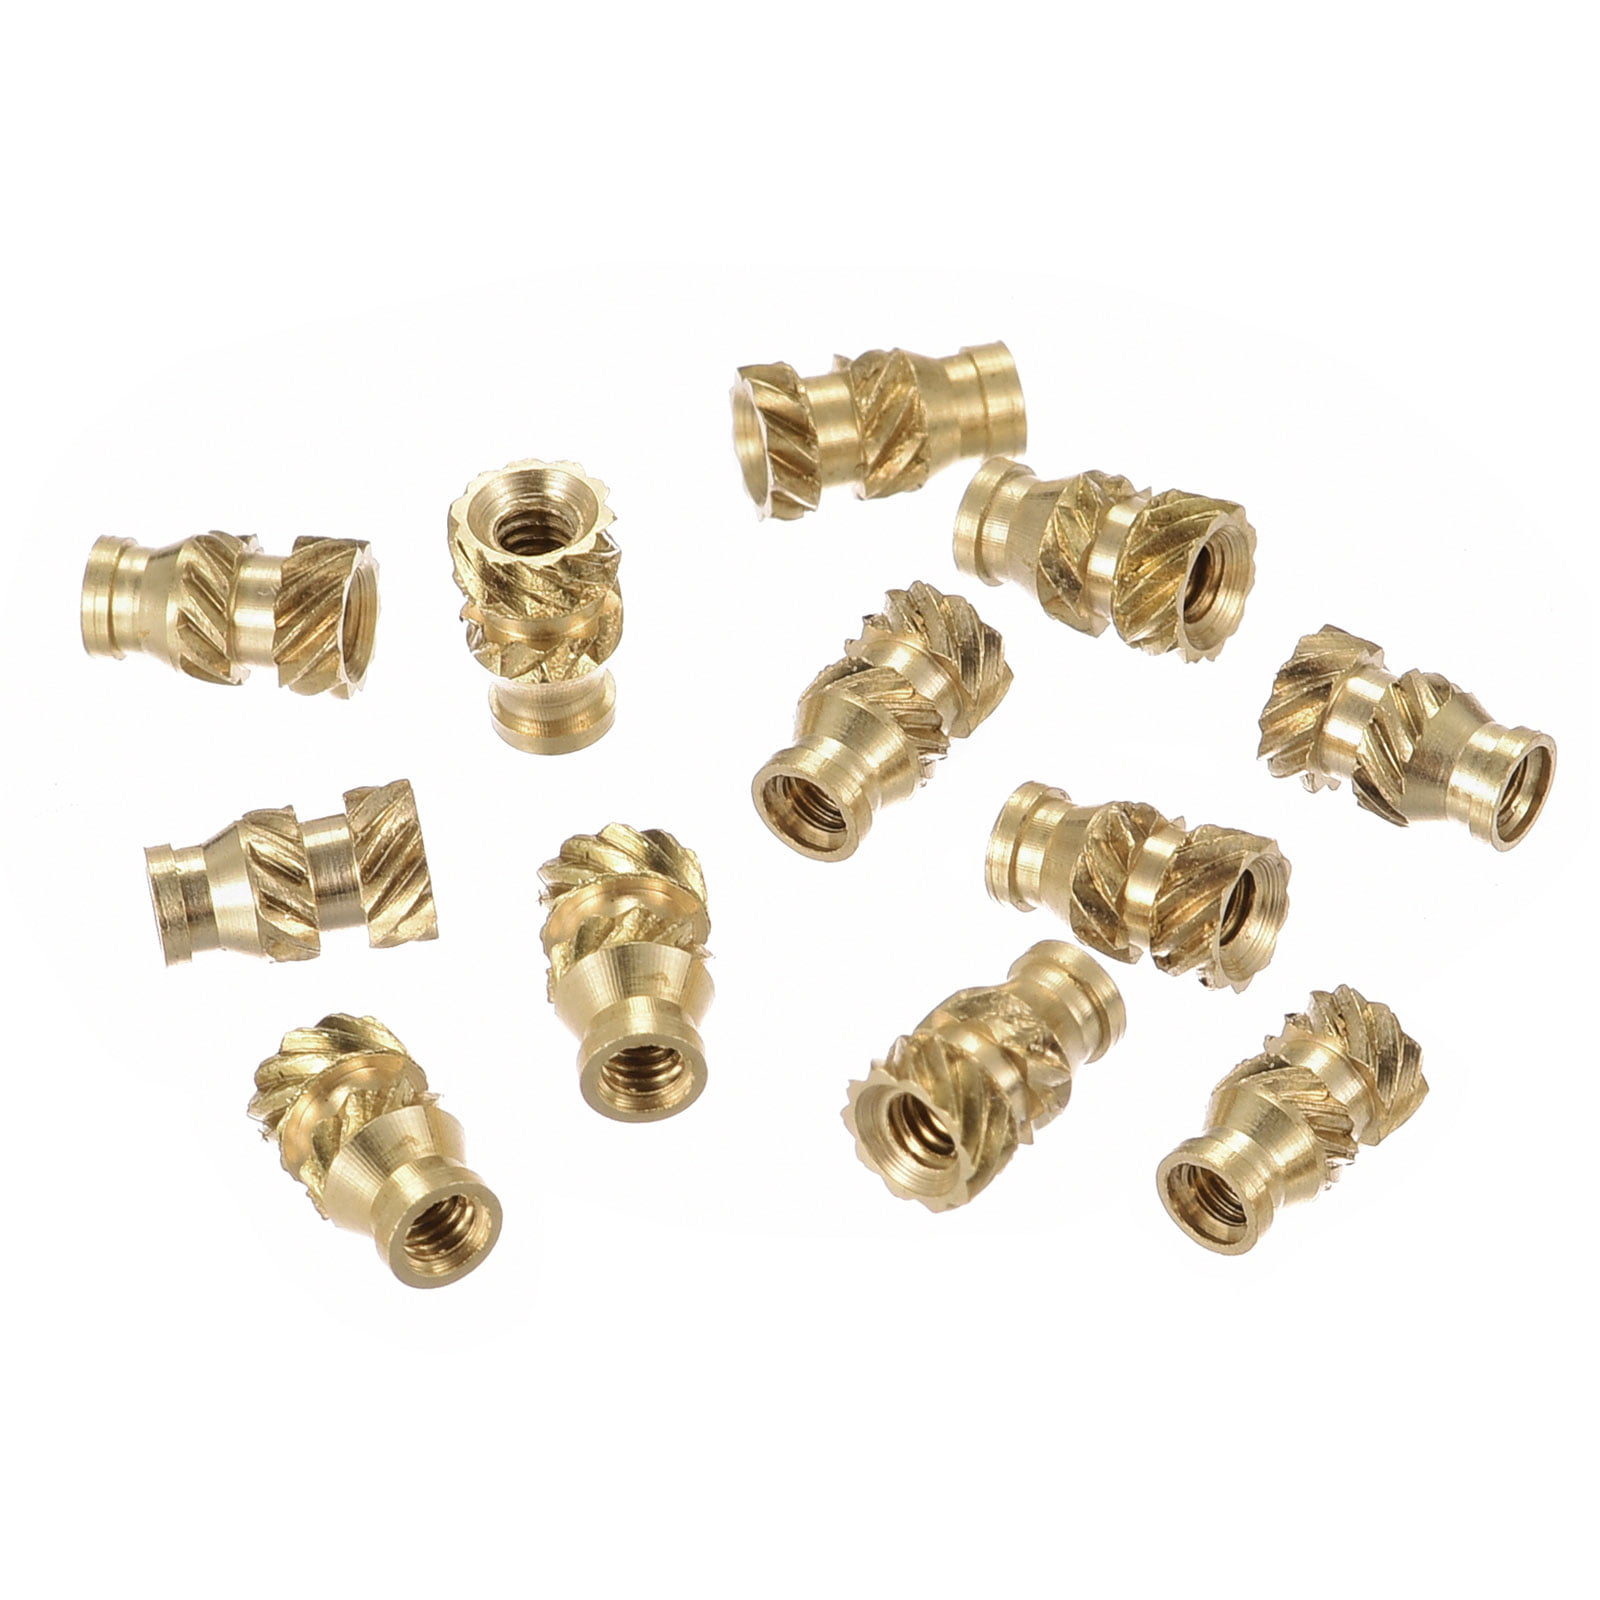 uxcell Knurled Insert Nuts - 50Pcs M3 x 6mm Length x 5mm OD Female Thread  Brass Threaded Insert Embedment Nut for 3D Printer